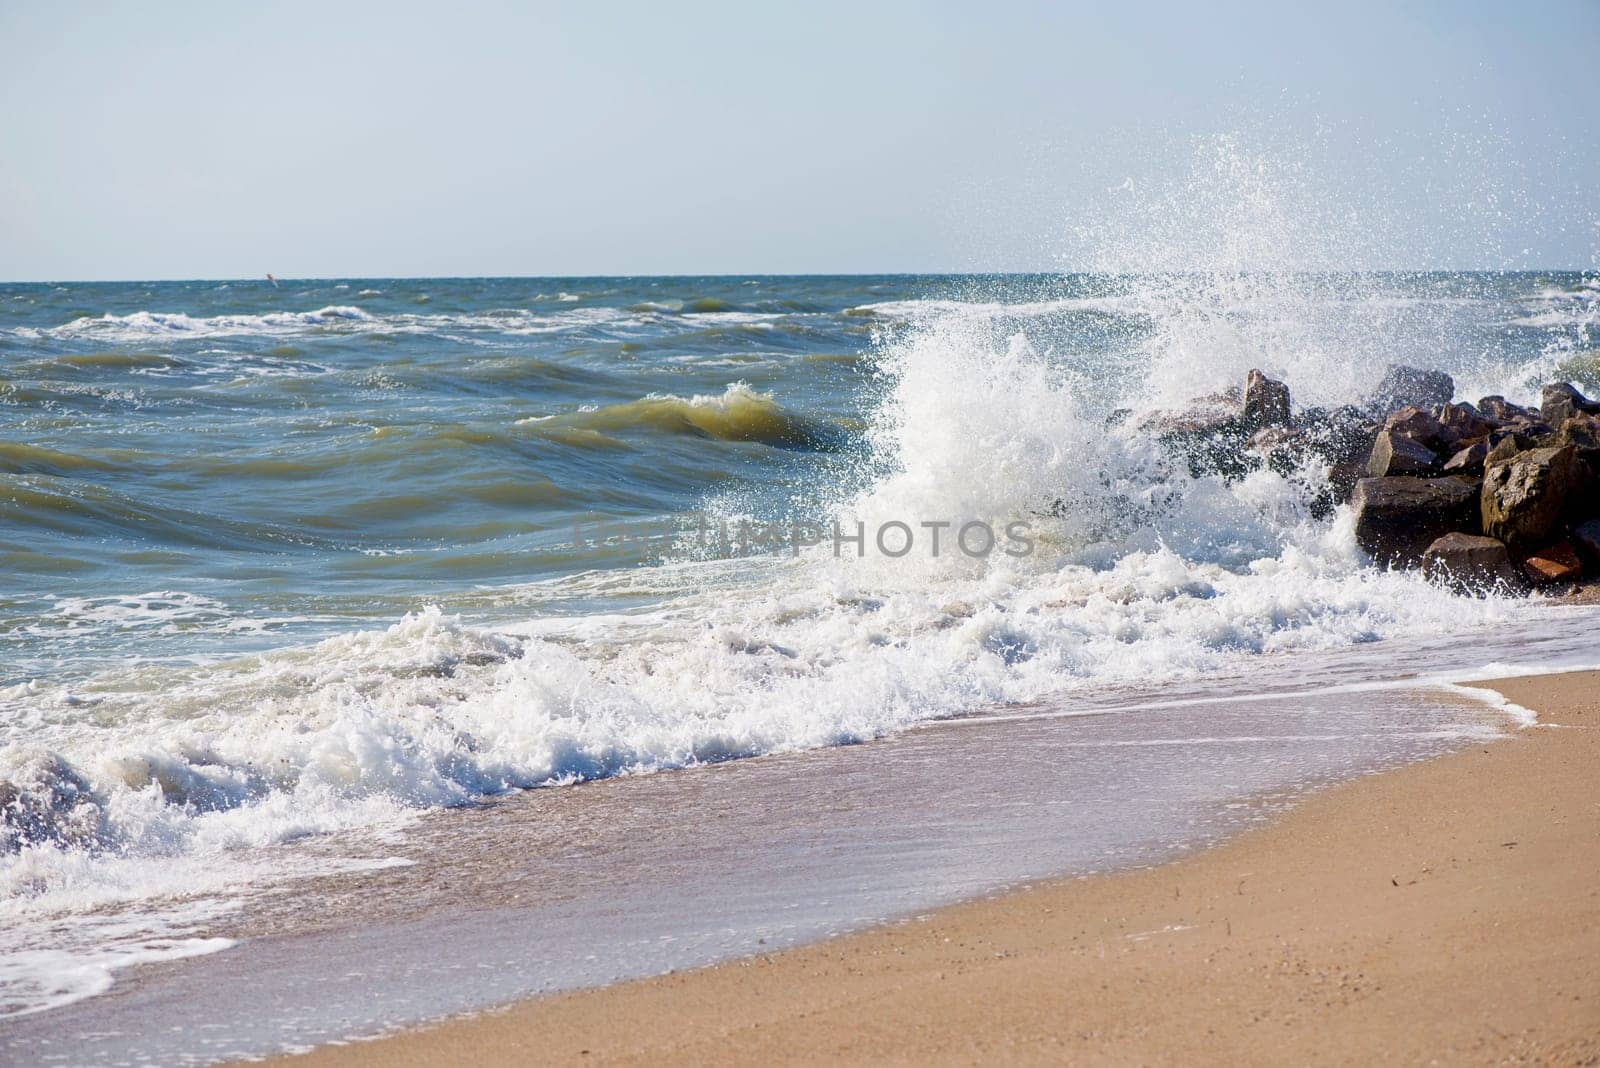 The sea is stormy. Sea of Azov. Water's edge, sea, wave, storm - marine natural background by aprilphoto